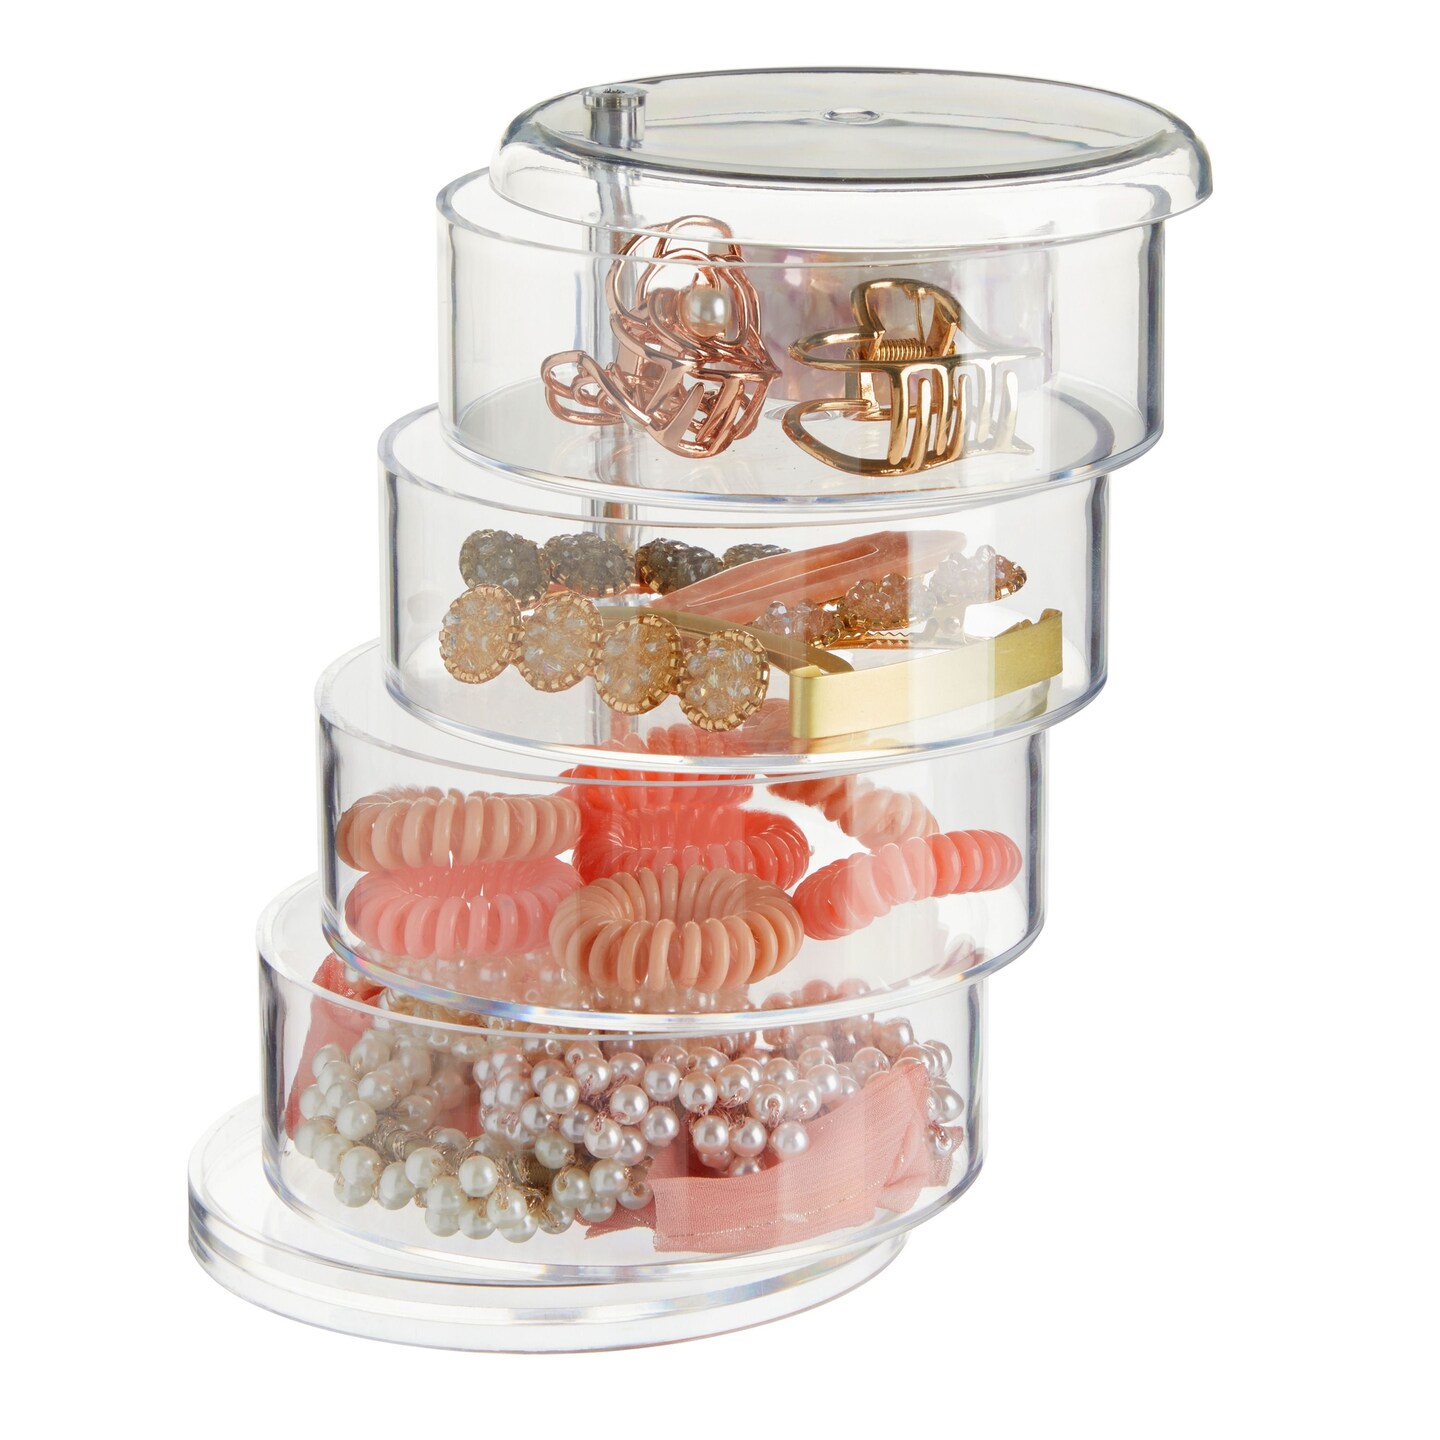 Bag for Clothes Storage 2 Tier Jewelry Organizer Box For Rings